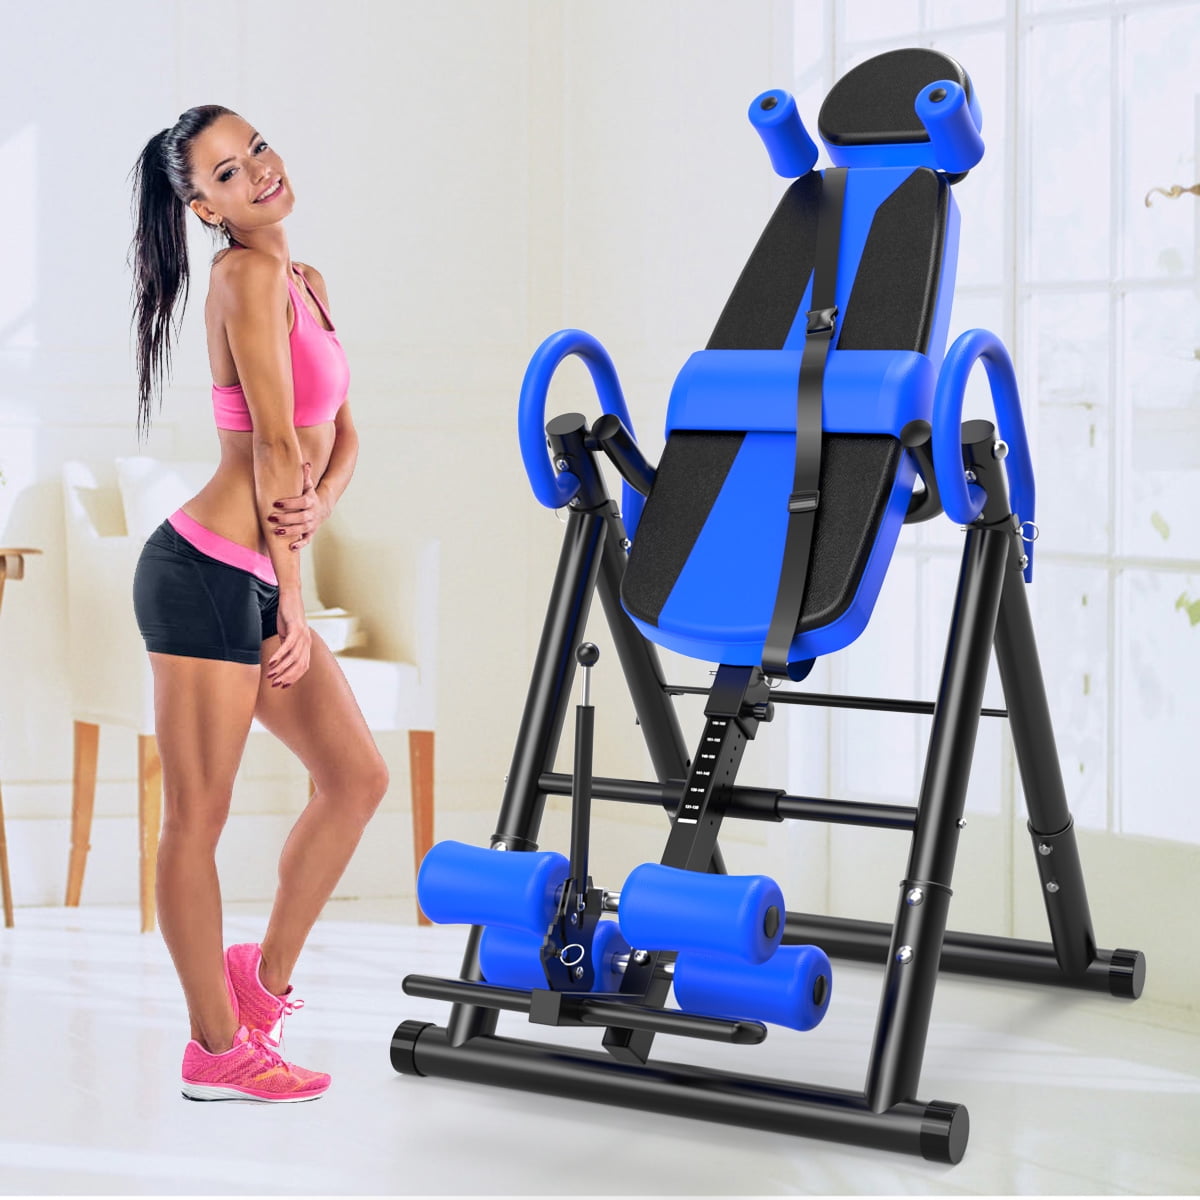 Heavy Duty Inversion Table Back Pain Relief Therapy Fitness Exercise Adjustable 